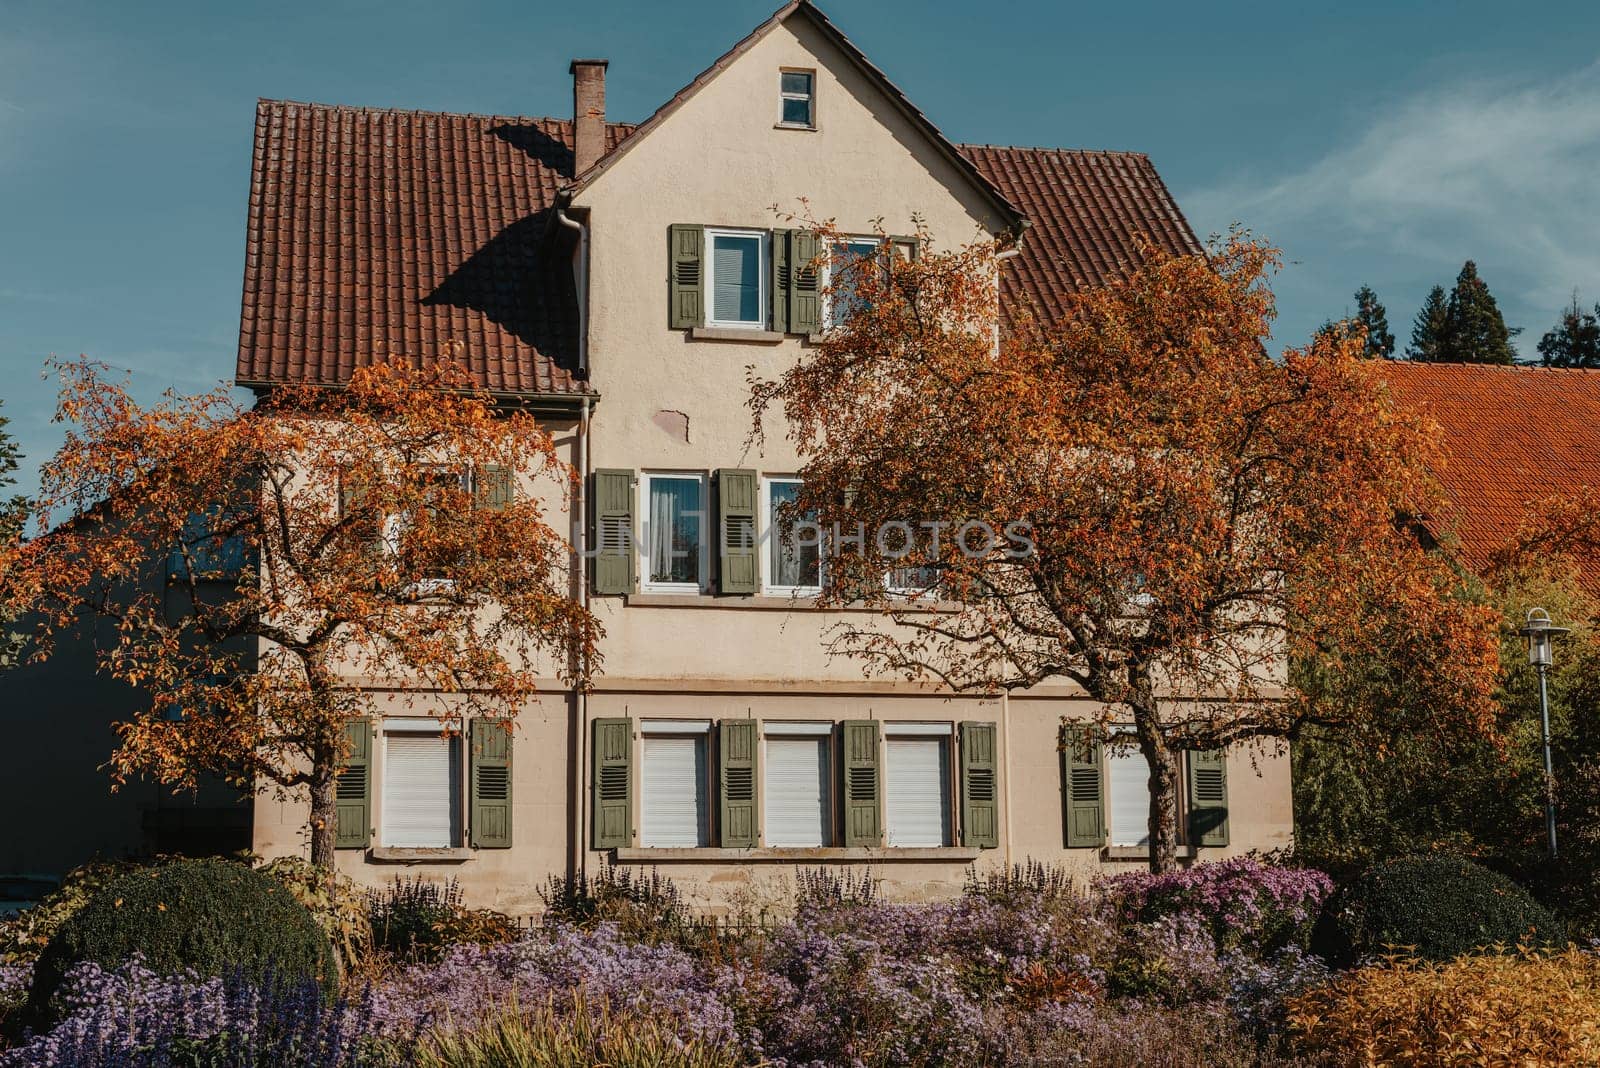 House with nice garden in fall. Flowers in the City Park of Bietigheim-Bissingen, Baden-Wuerttemberg, Germany, Europe. Autumn Park and house, nobody, bush and grenery by Andrii_Ko